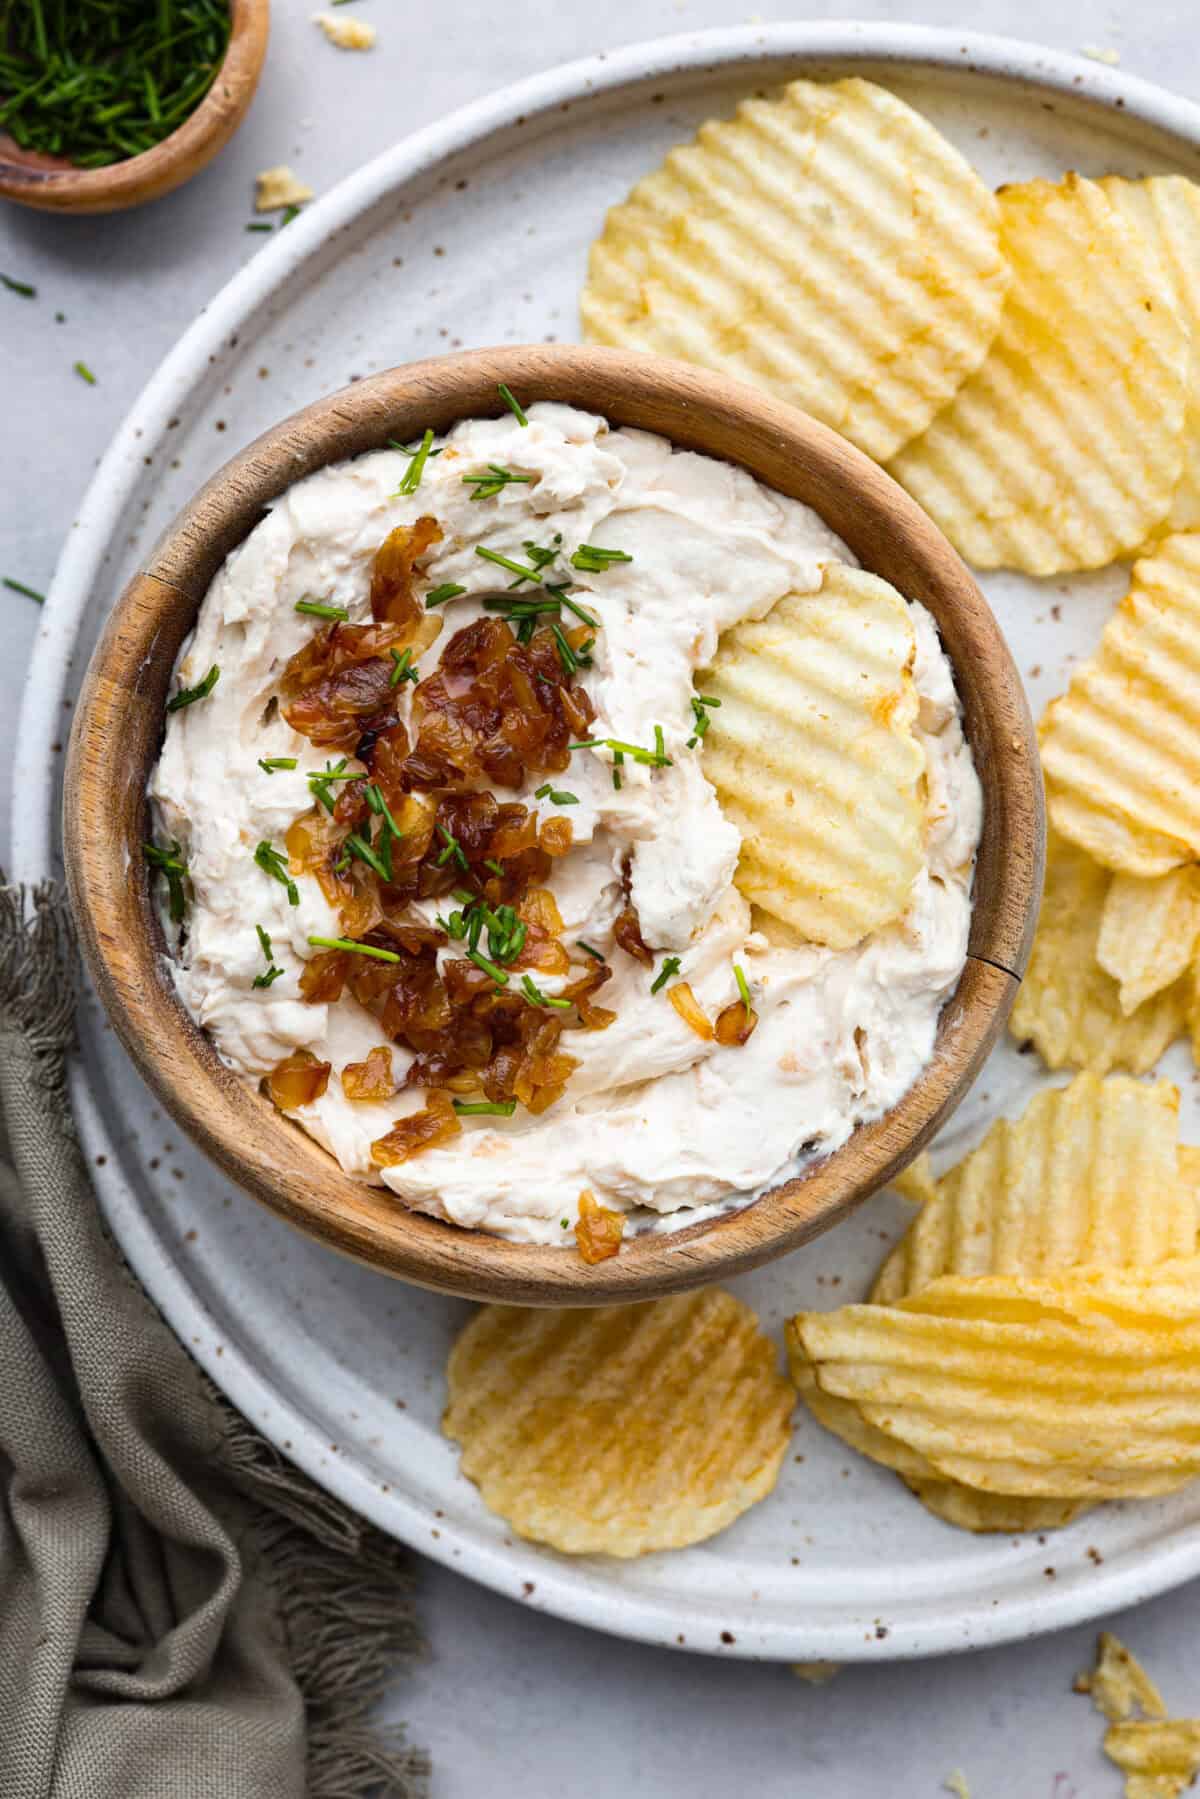 Top view of French onion dip in a wood bowl with chips on the side.